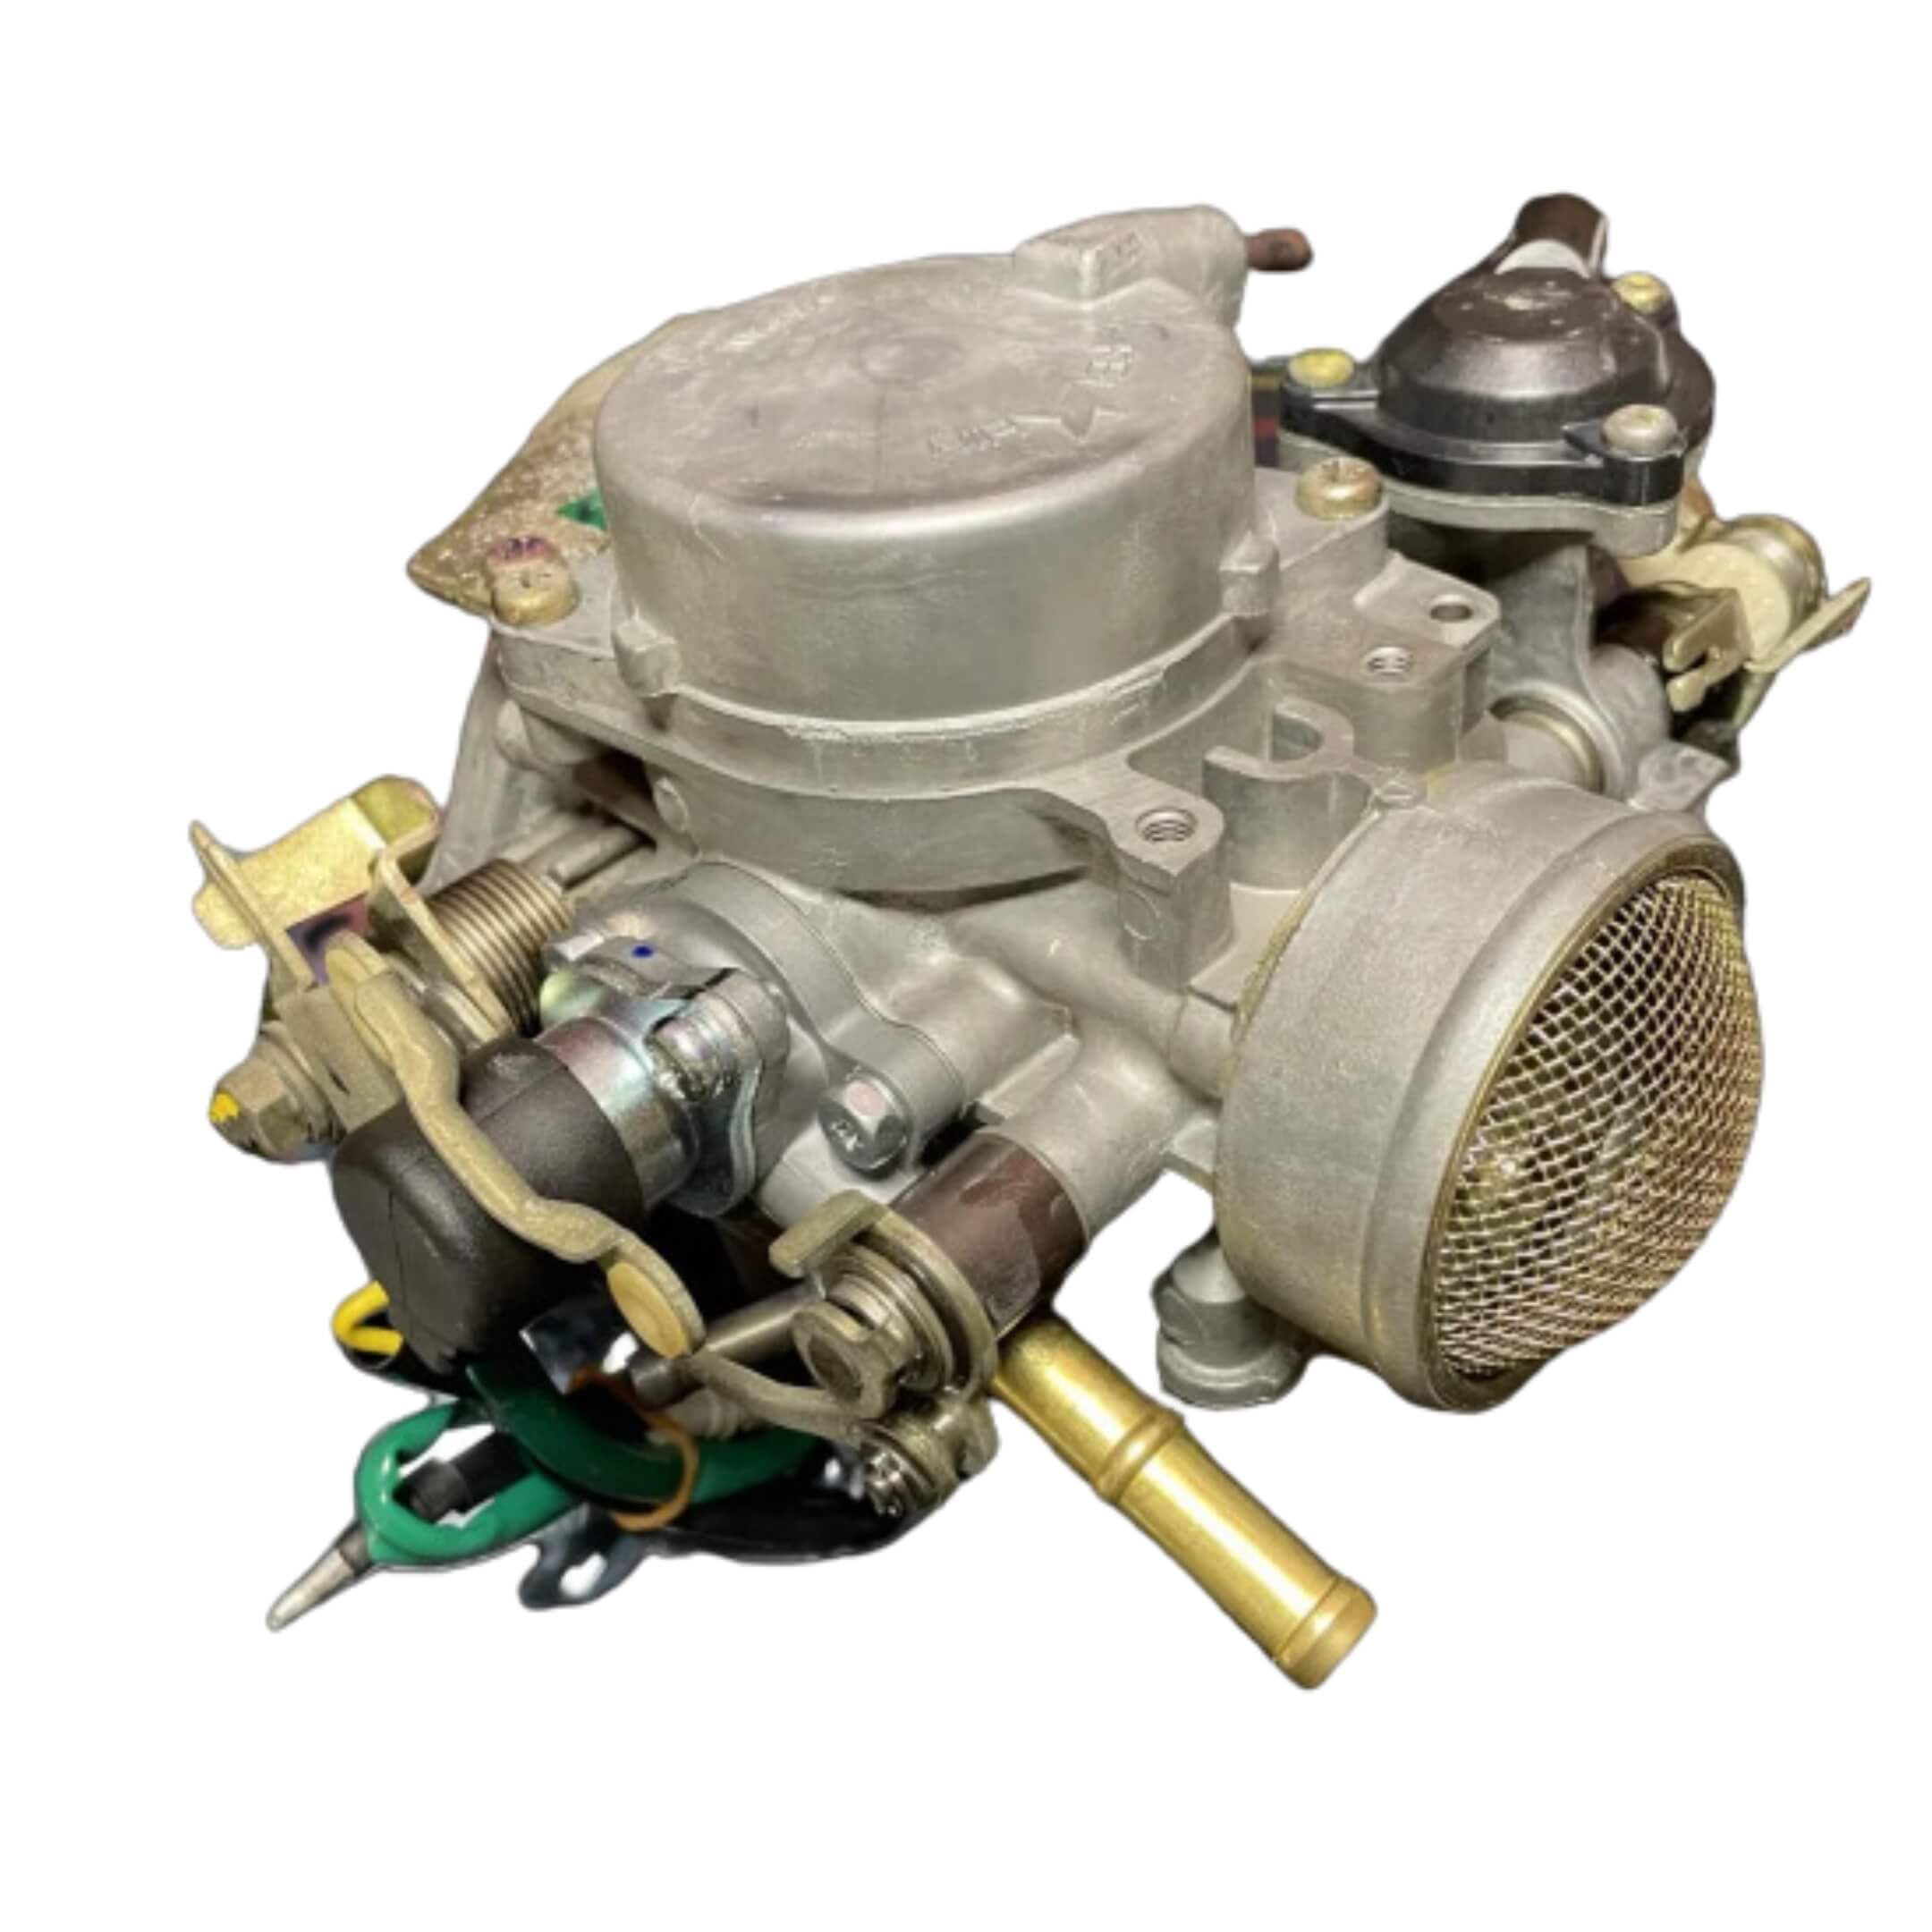 Detailed view of Honda Acty carburetor for HA3, HA4 models (1990-1999) showcasing the complete assembly with air and fuel components